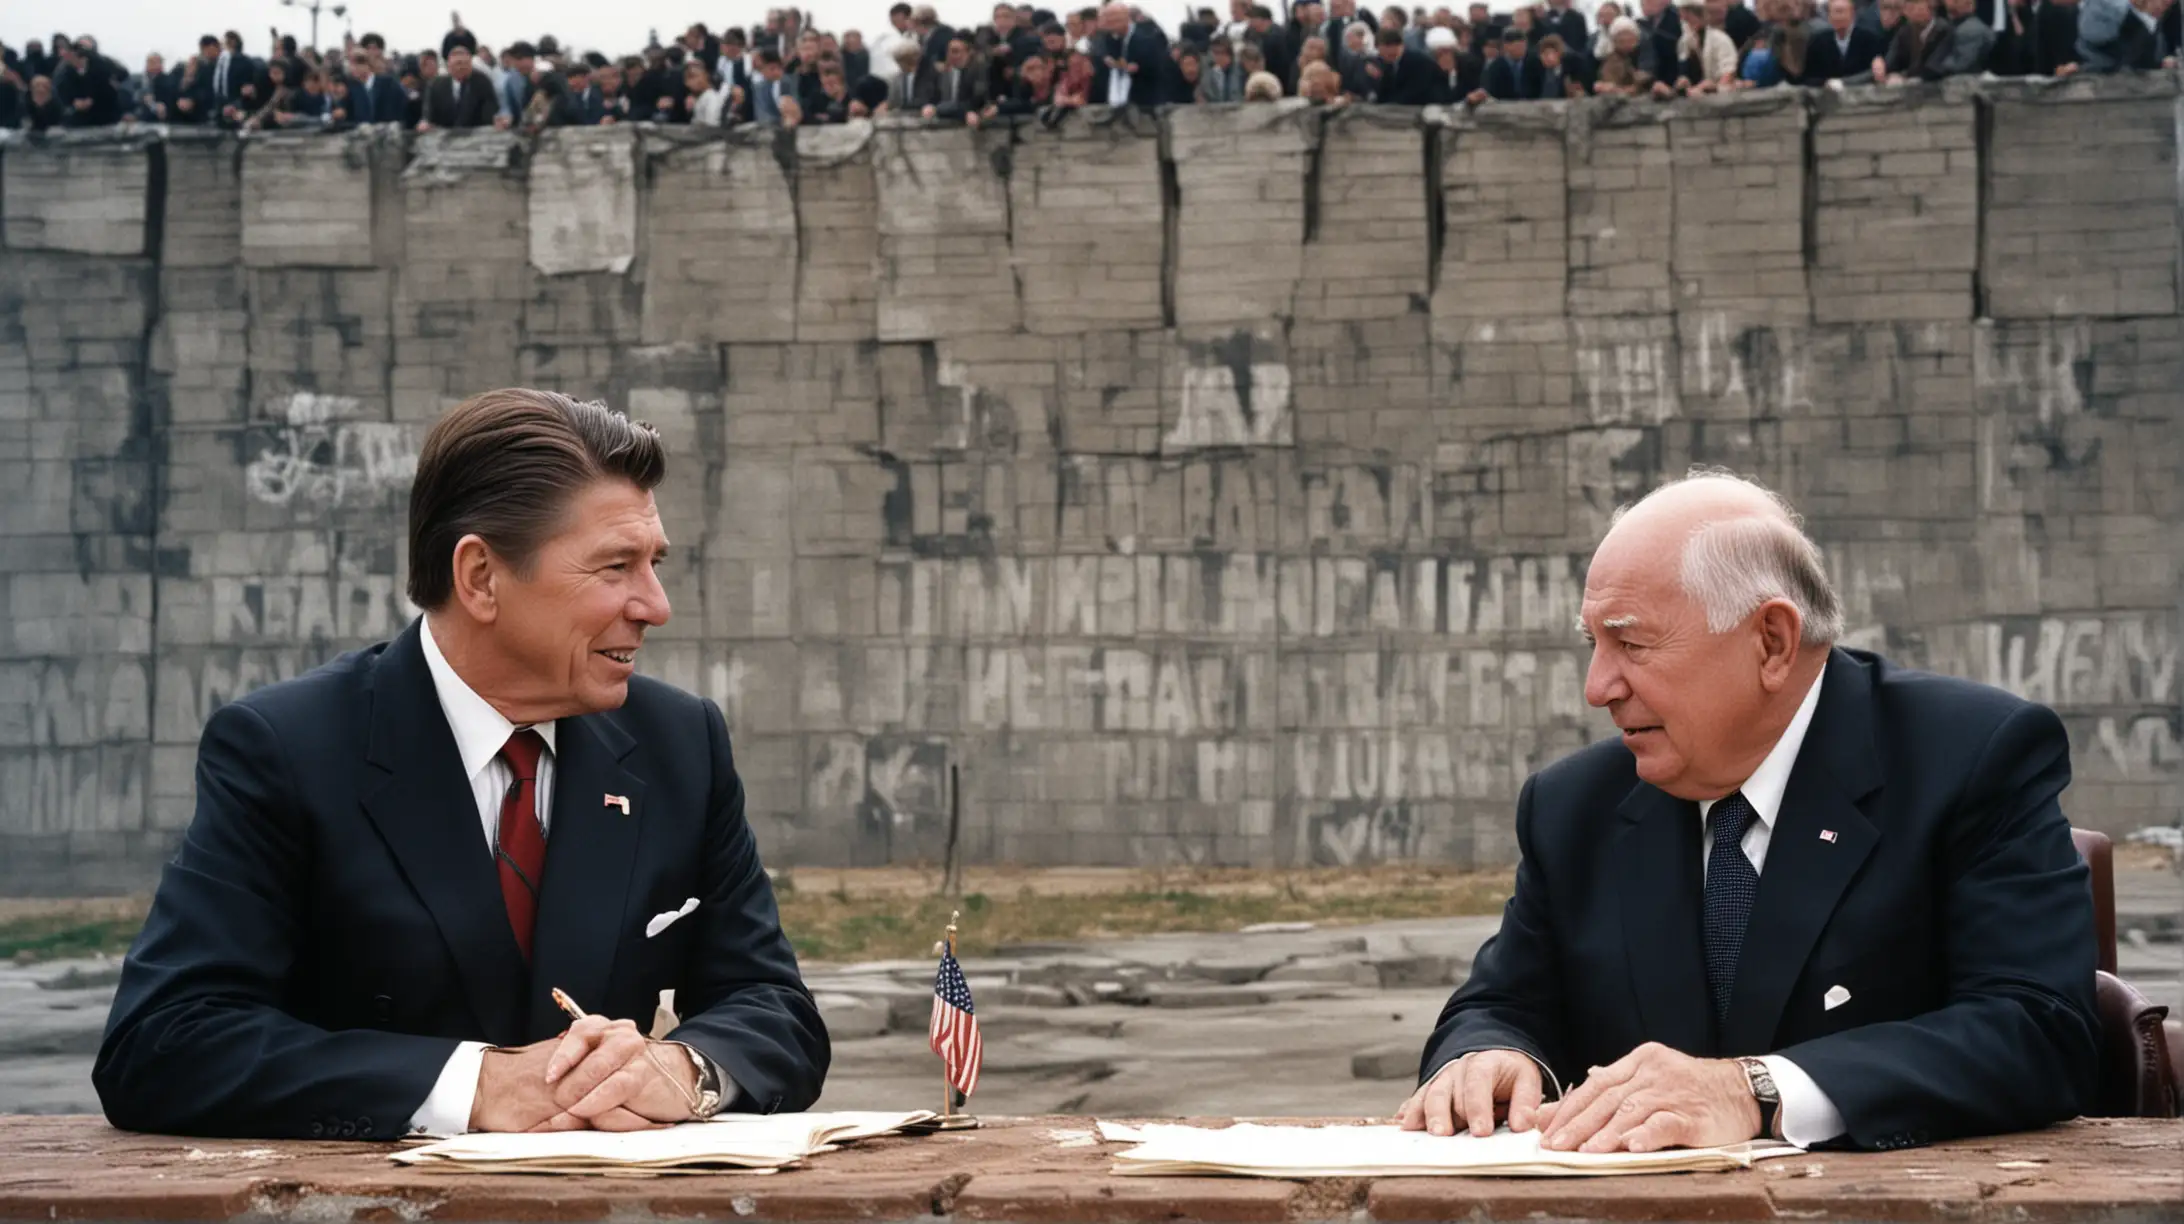 Ronald Reagan and Mikhail Gorbachev Signing Nuclear Disarmament Treaty with Berlin Wall Background